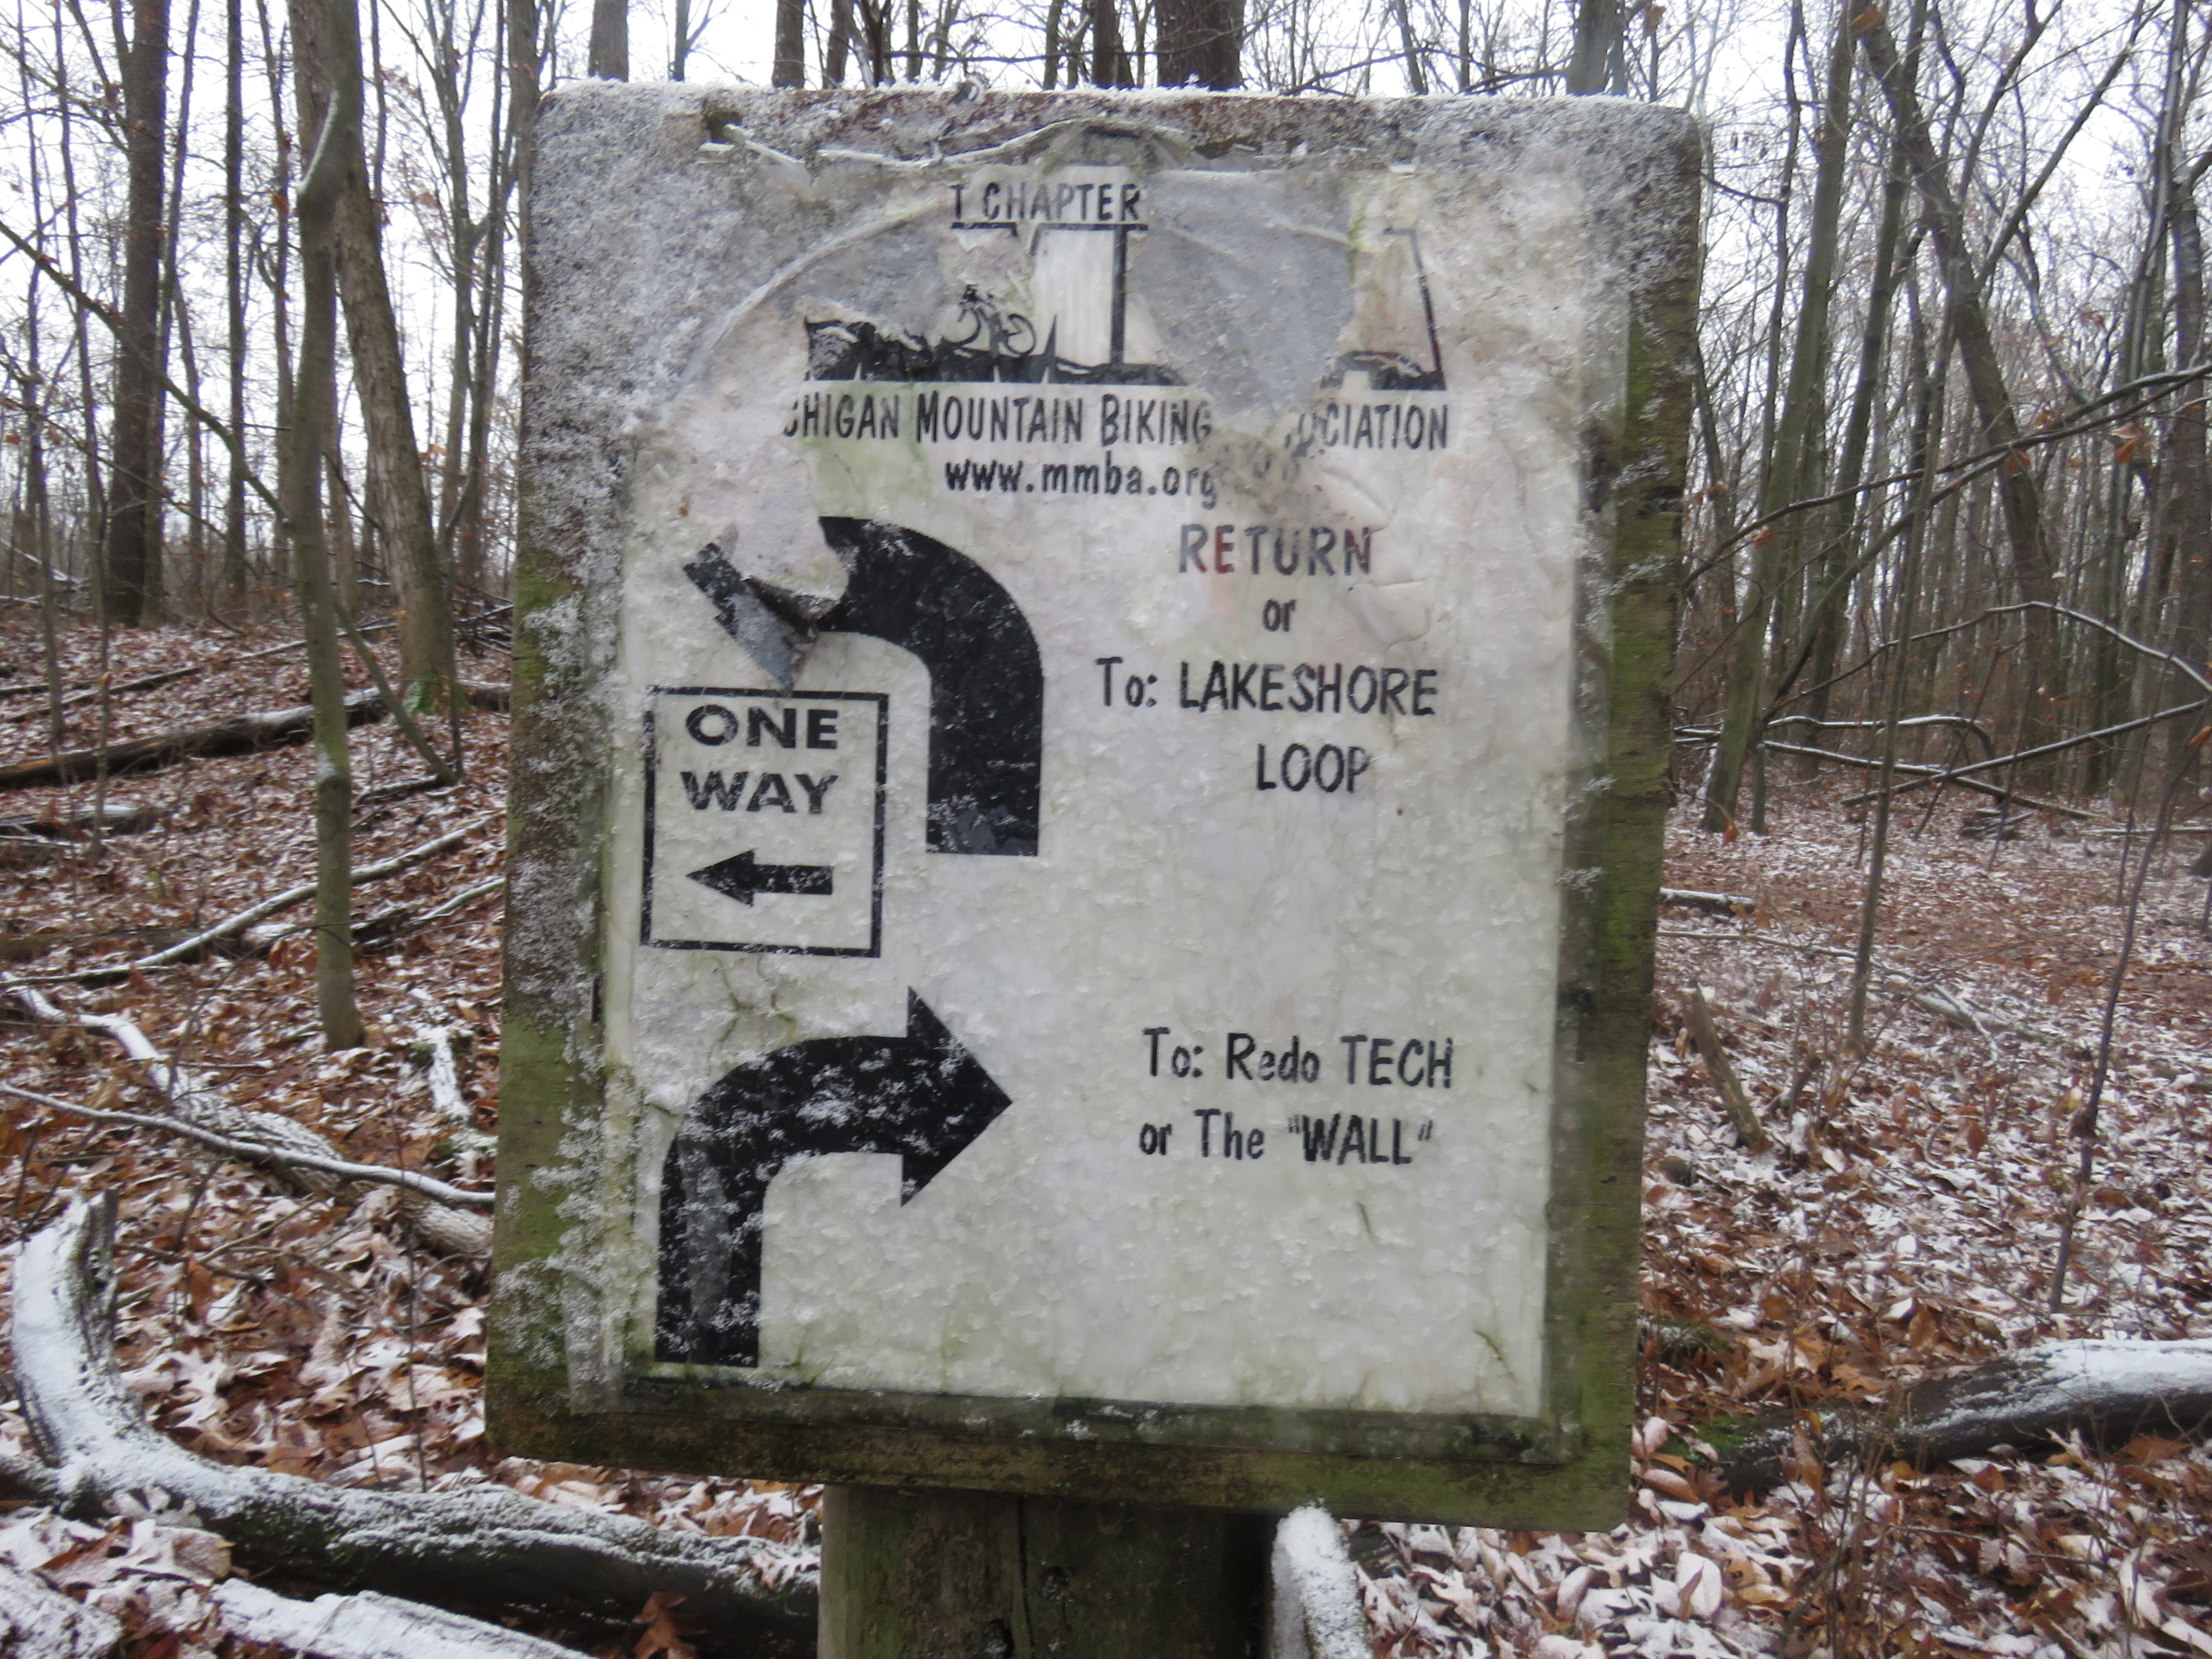 A trail marker with a ragged sign that has arrows pointing to RETURN or Lakeshore Loop, and Redo TECH or The "Wall."